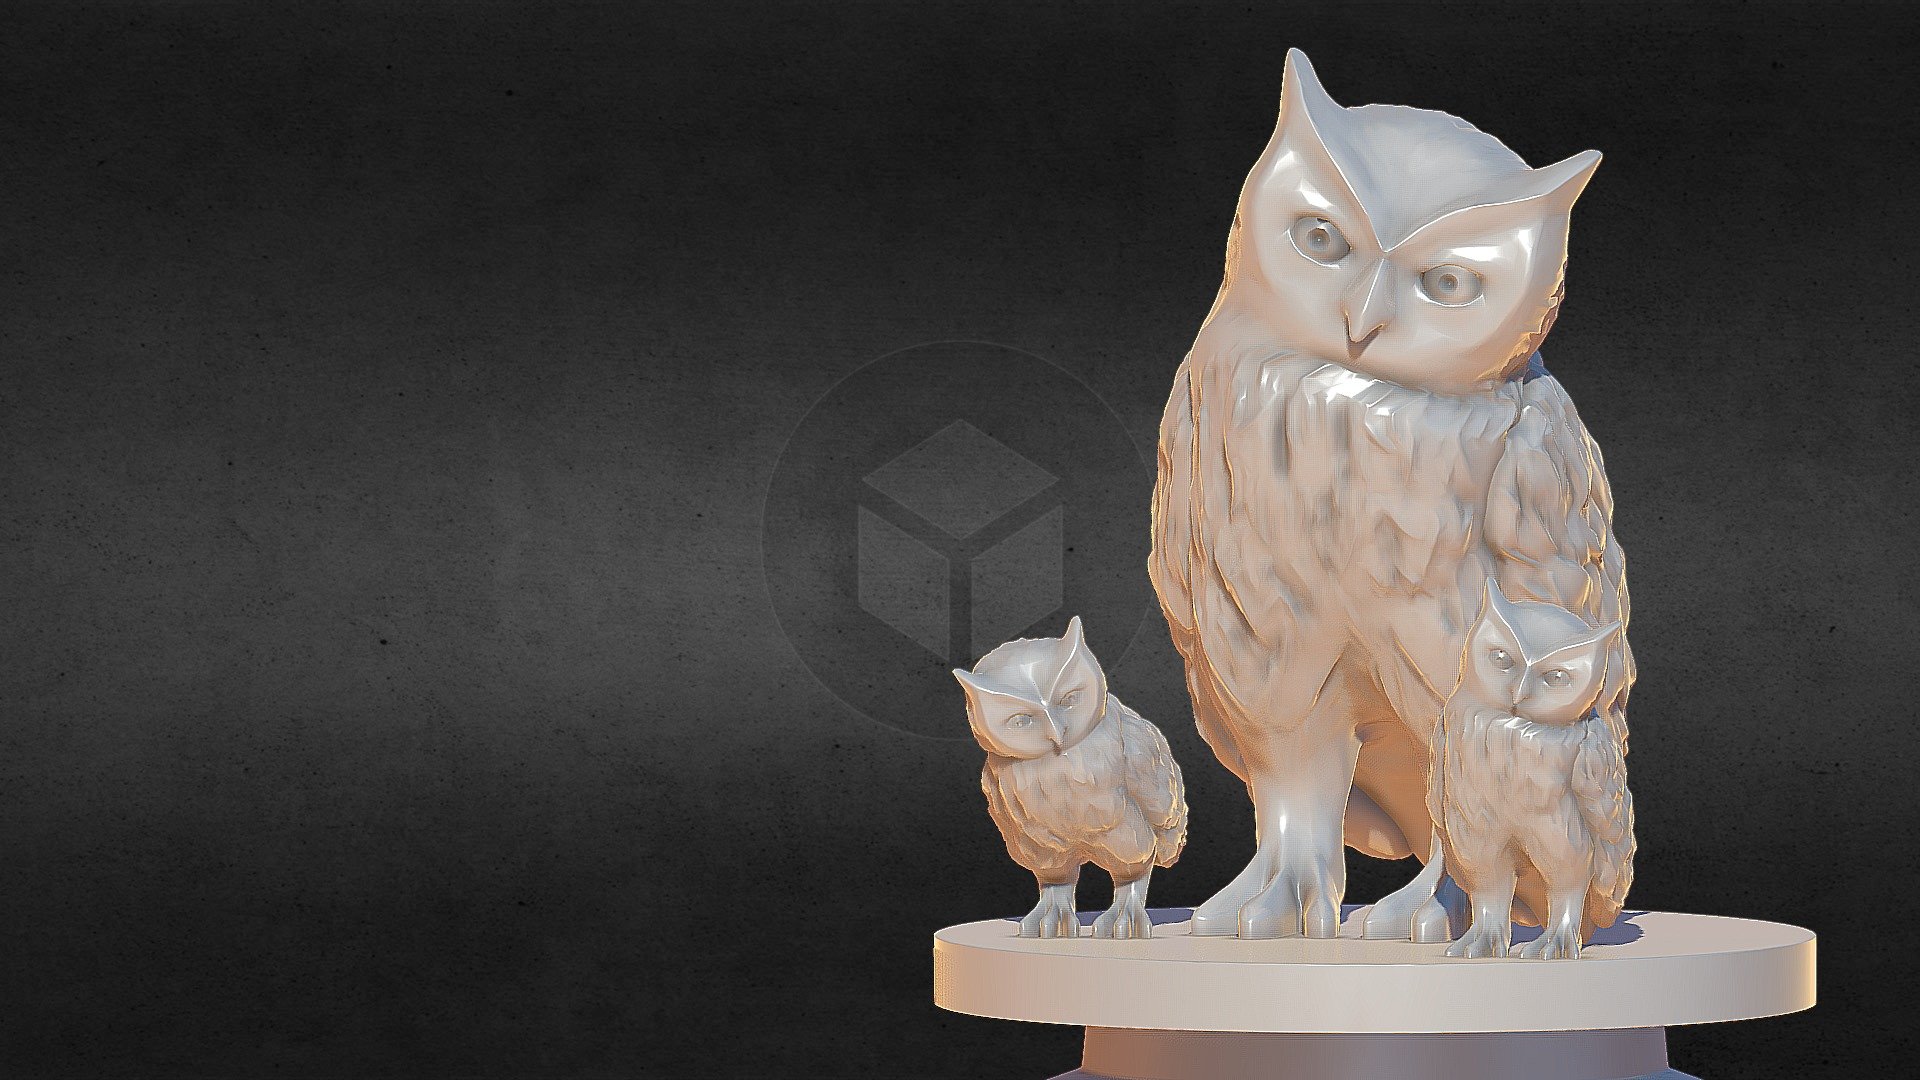 owl family 3d print model ready to use

Print Size In inch

x 5.20 inch

y 5.00 inch

z 5.20 inch

Polycount

Vertex 550834 Face 1101622

File format

ZTL Obj Fbx Stl

We greatly appreciate you choosing our 3D models and hope they will be of use. We look forward to continuously dealing with you.

If you like this collection don't forget to rate it please - Enjoy

Hope you like it! - Owl Family 3d print - 3D model by Mikle (@cgamit786) 3d model